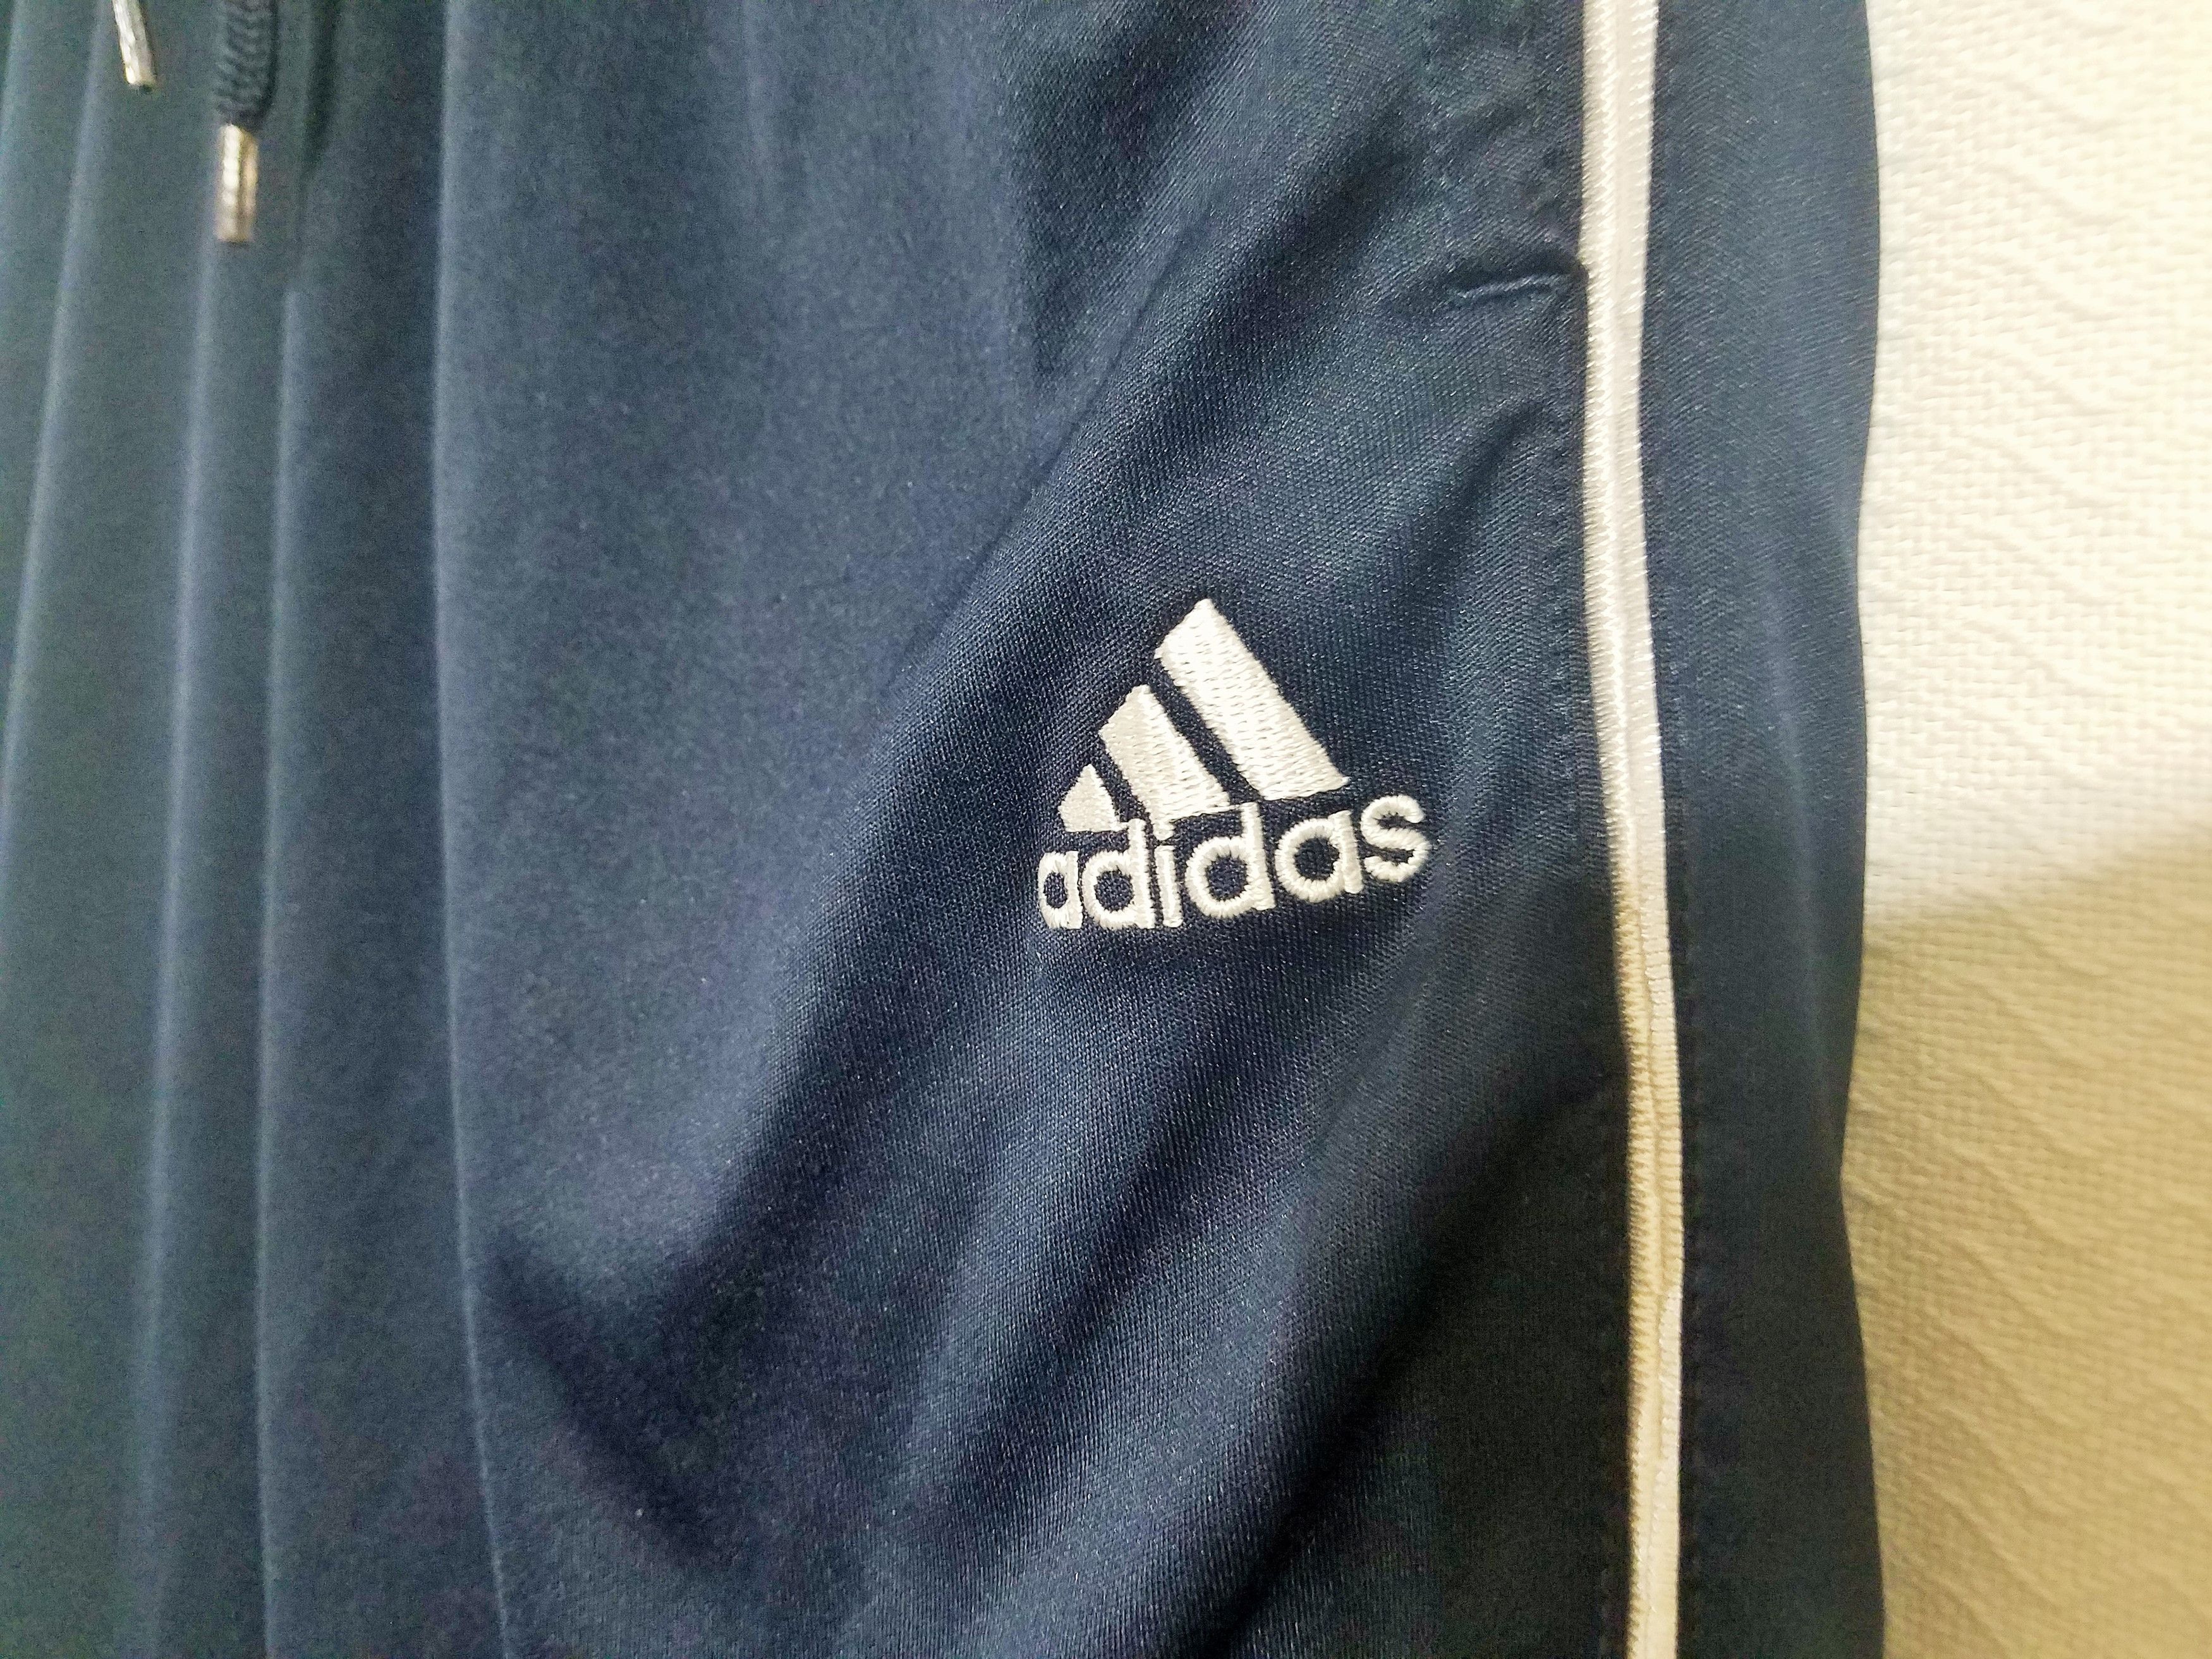 Adidas Adidas Men's Small Navy Blue Athletic Pants Joggers Track Size US 30 / EU 46 - 2 Preview